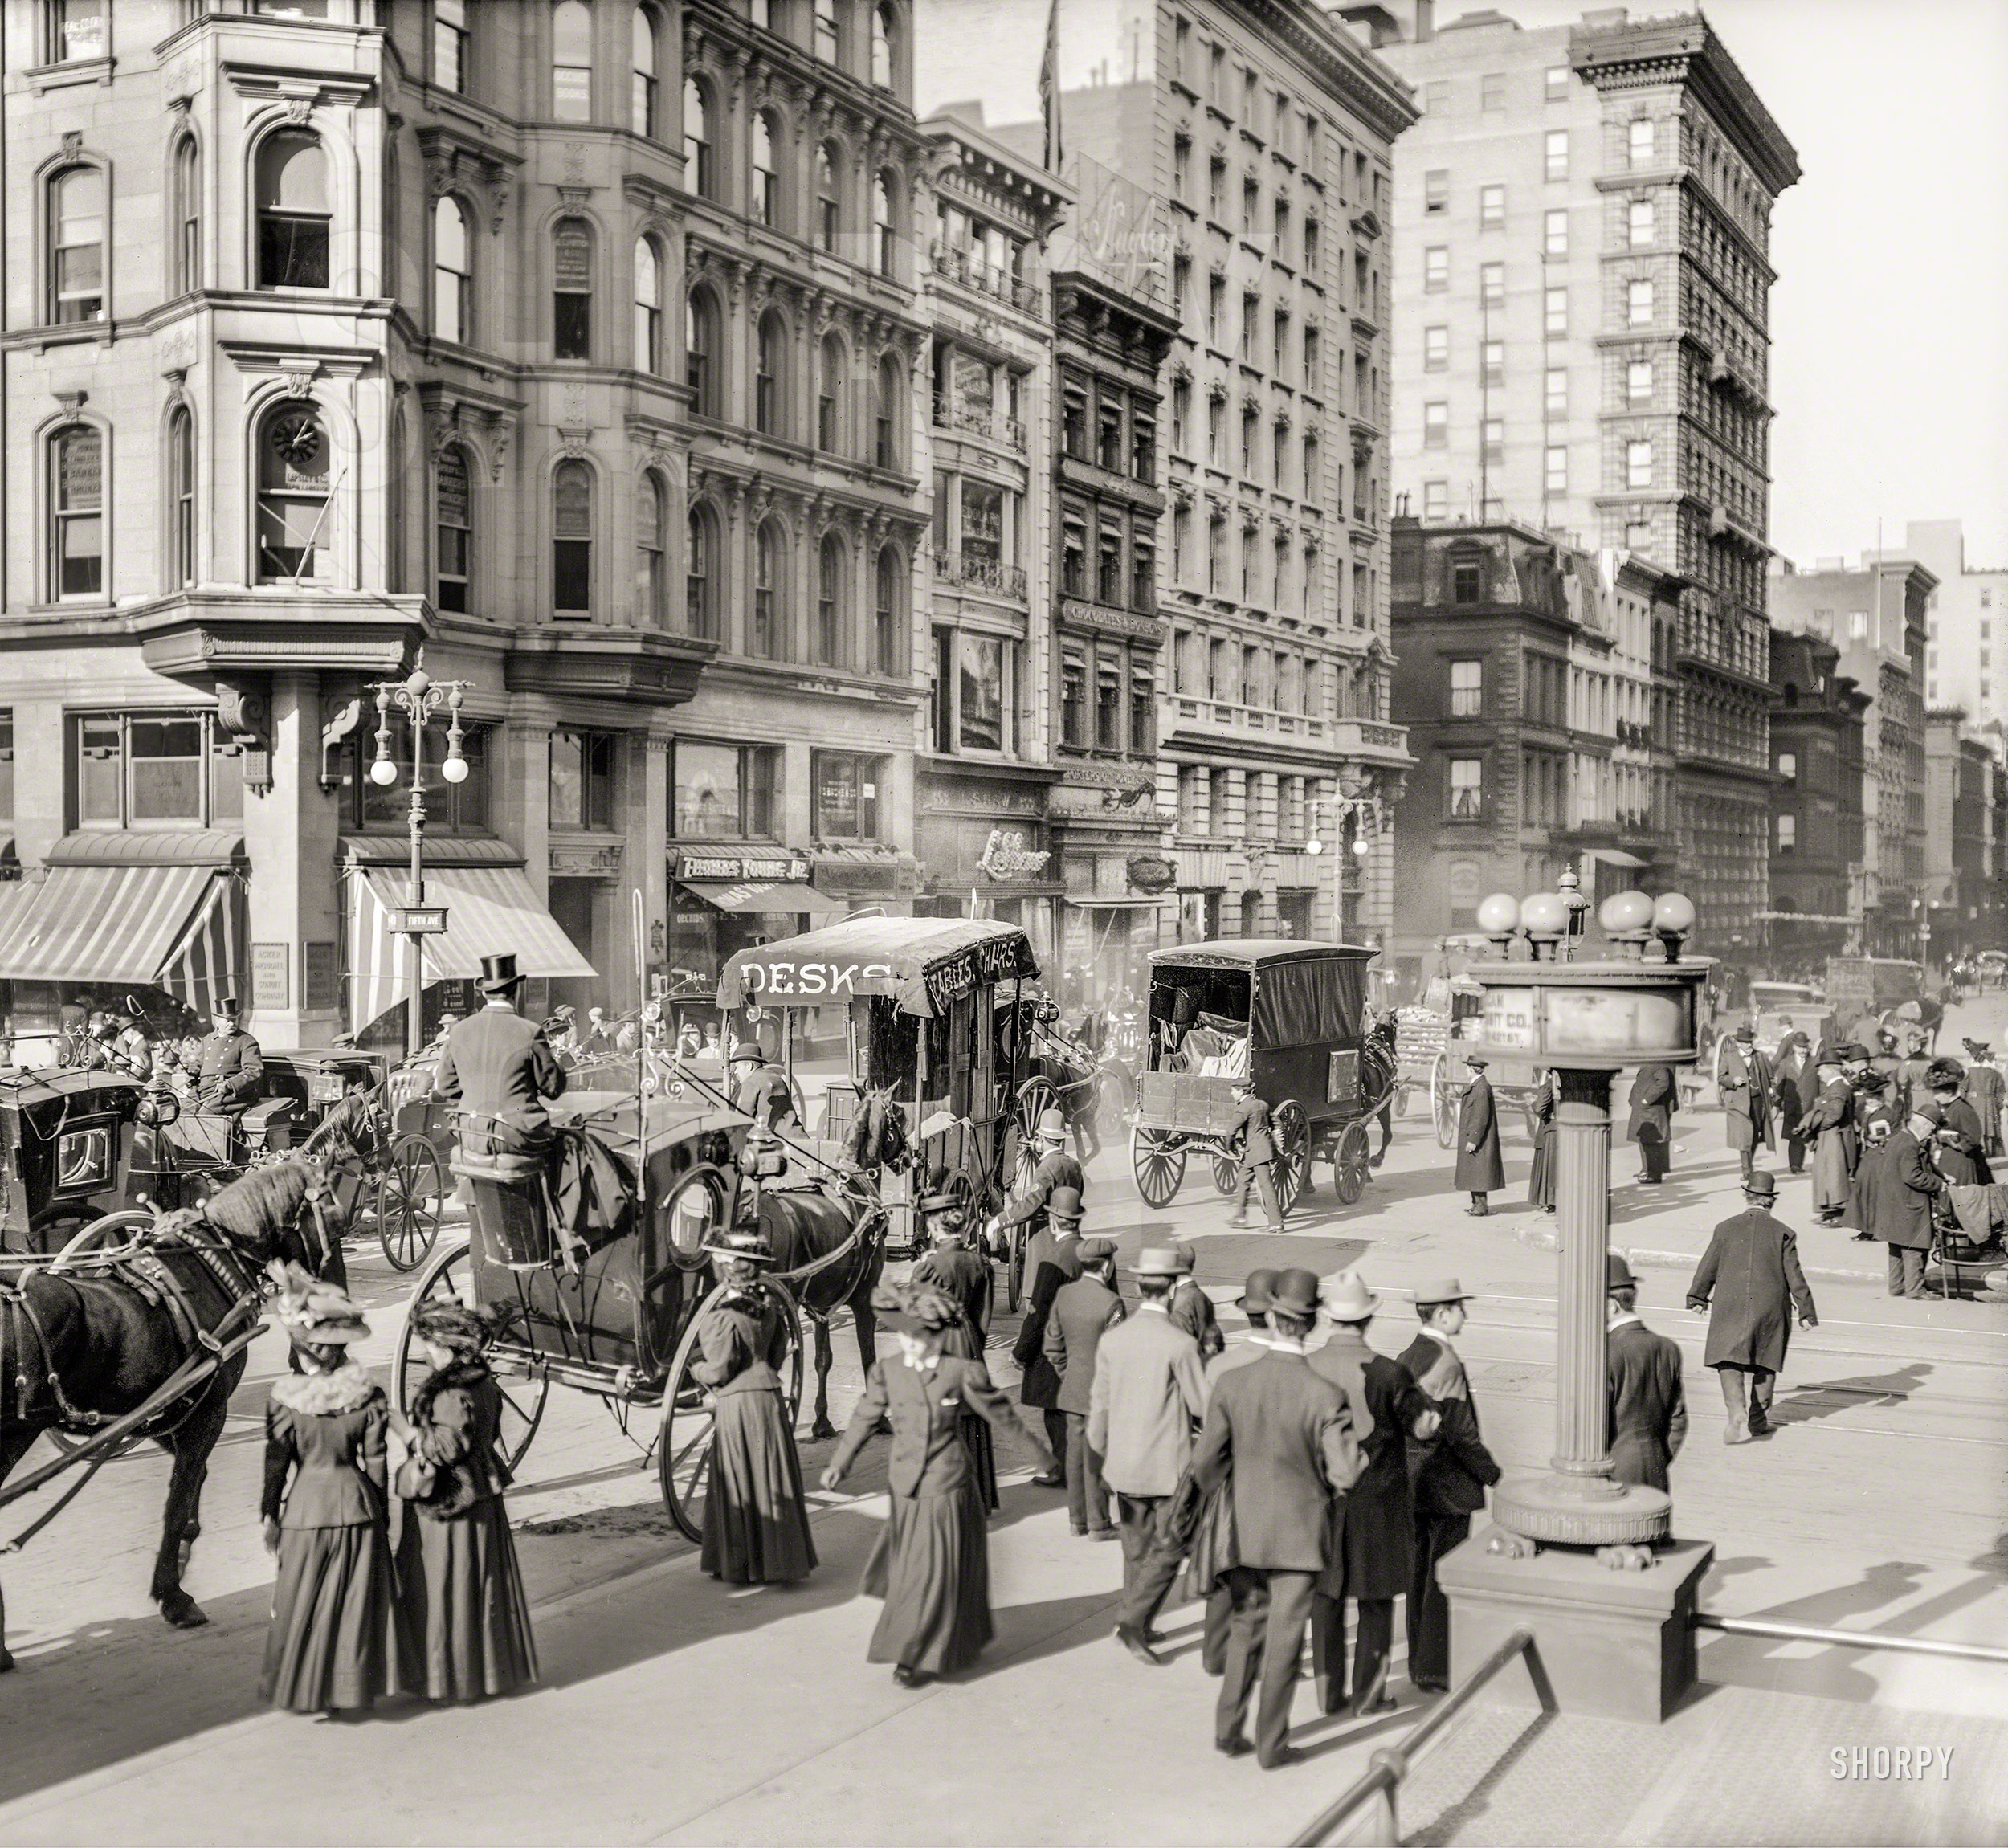 New York circa 1908. "Fifth Avenue and 42nd Street." Where hustle meets bustle. 8x10 inch dry plate glass negative, Detroit Publishing Company. View full size.